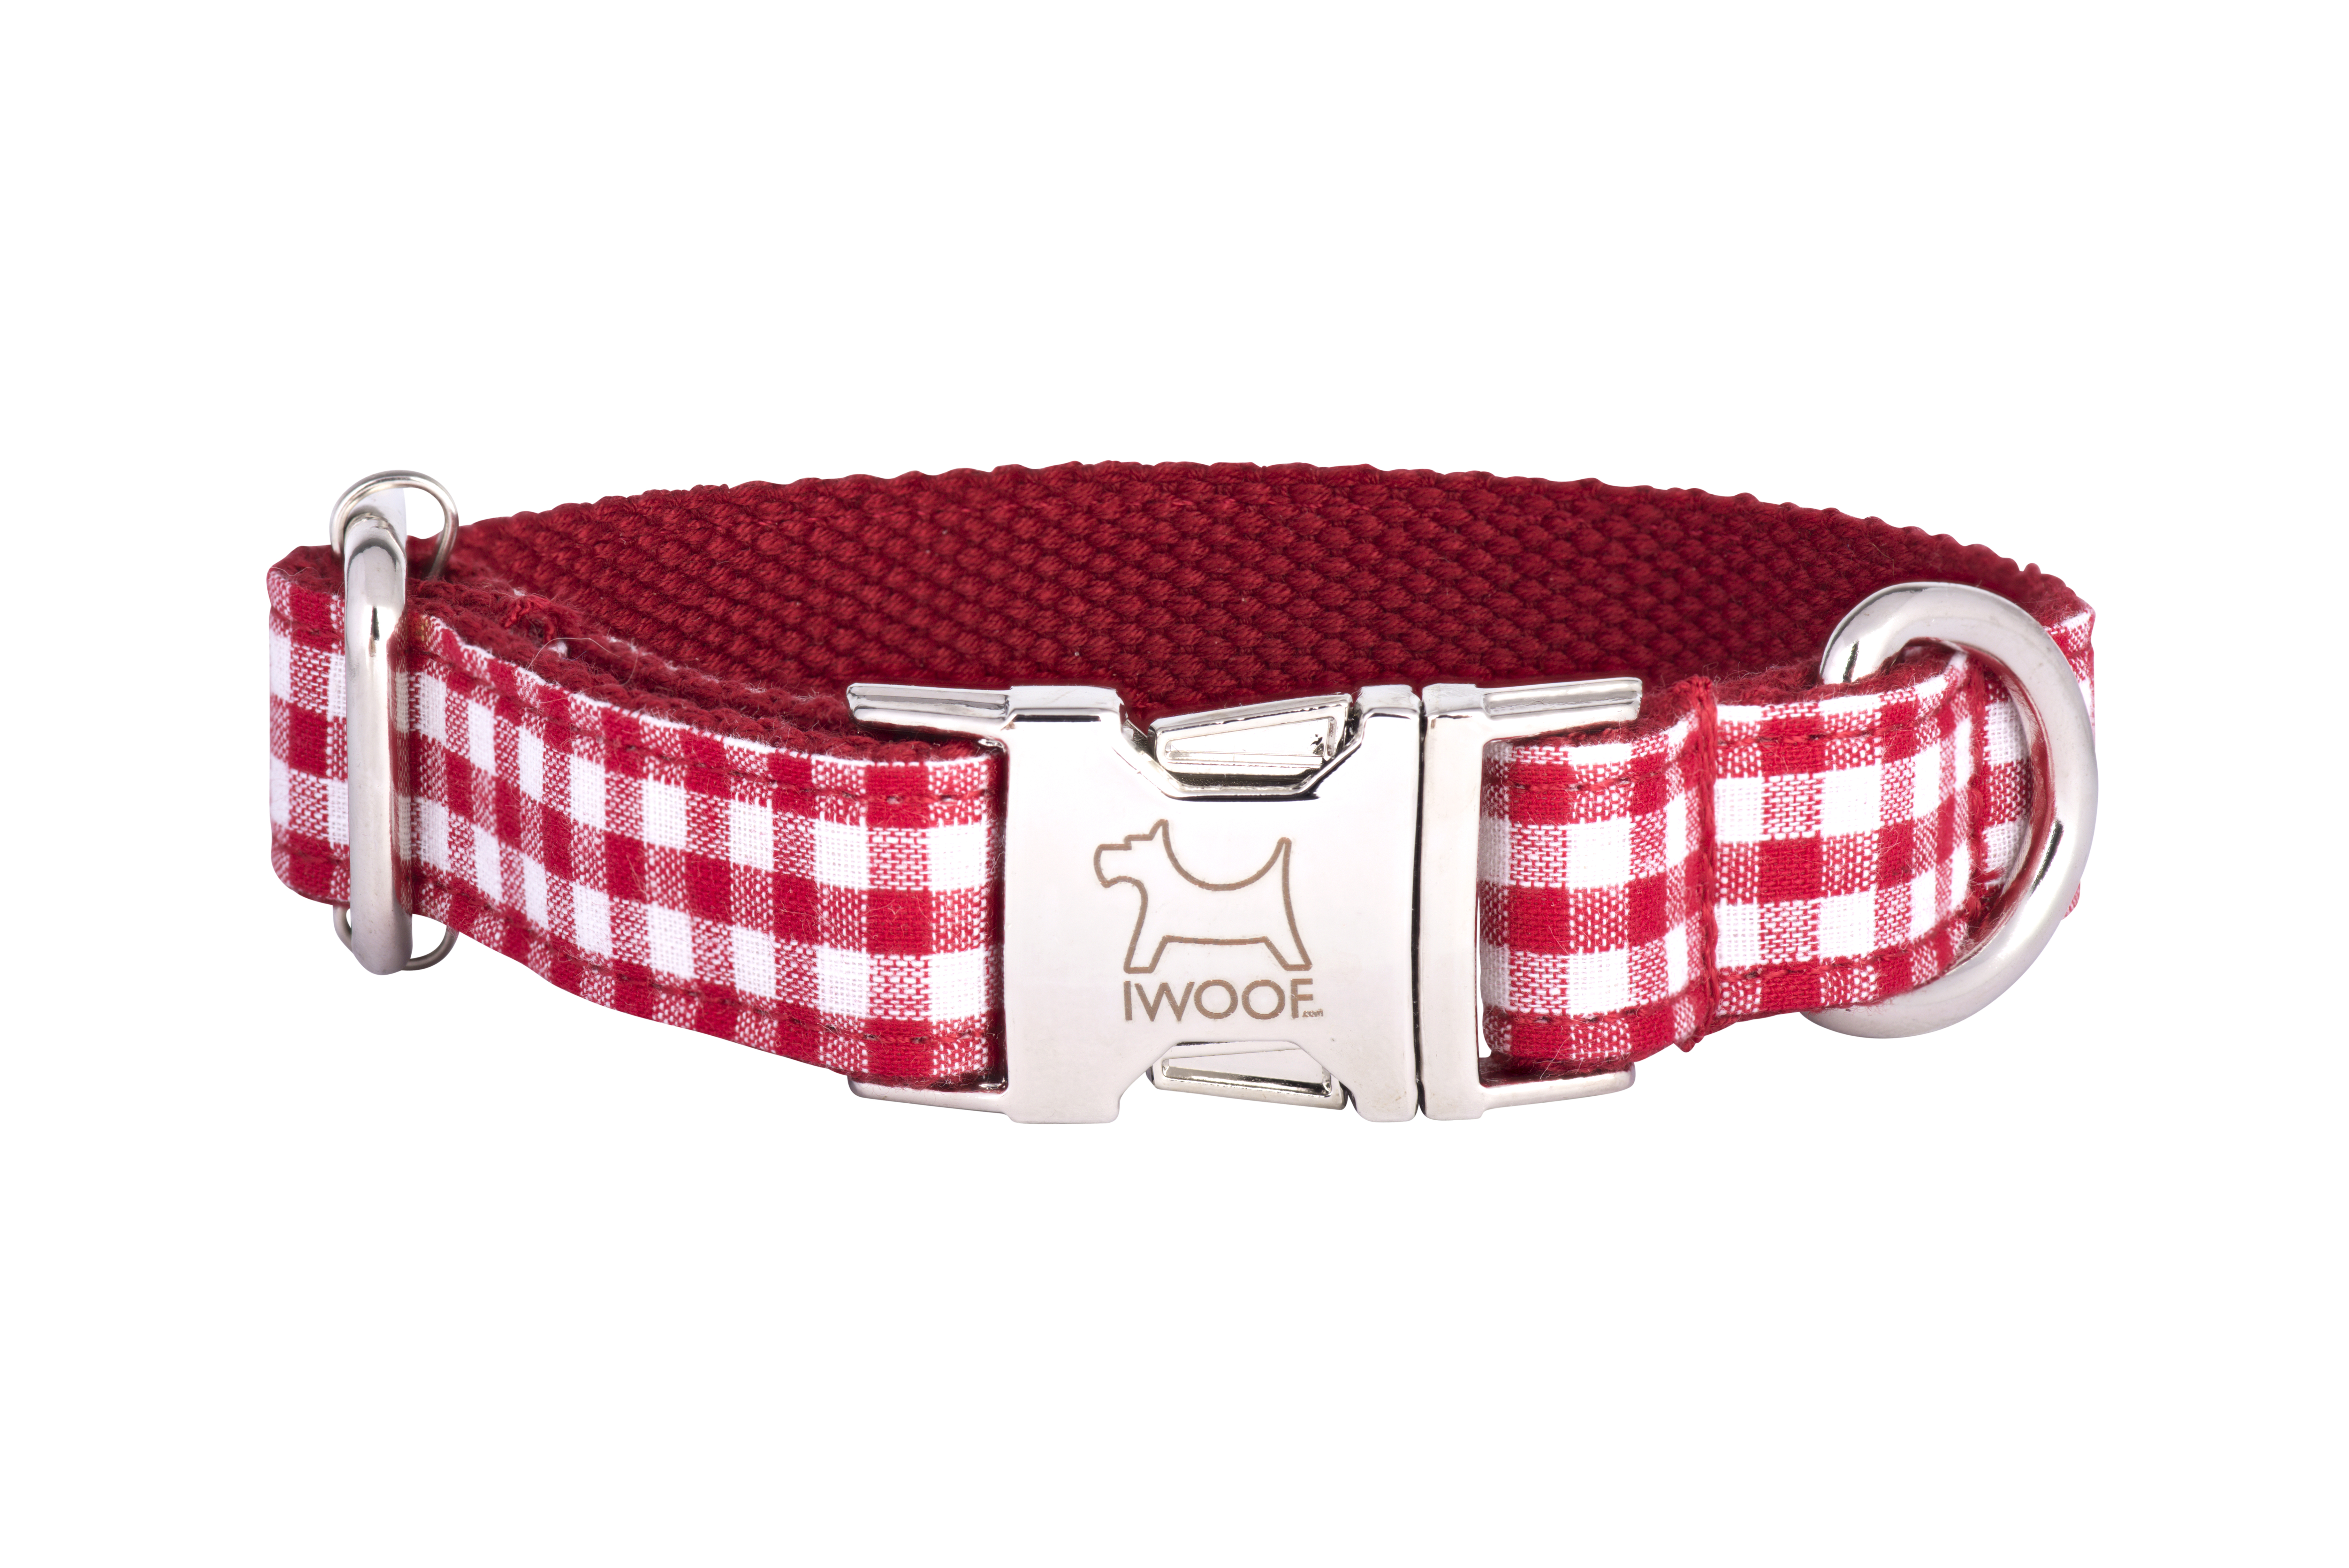 Red Check designer dog collar and matching designer dog lead by IWOOF